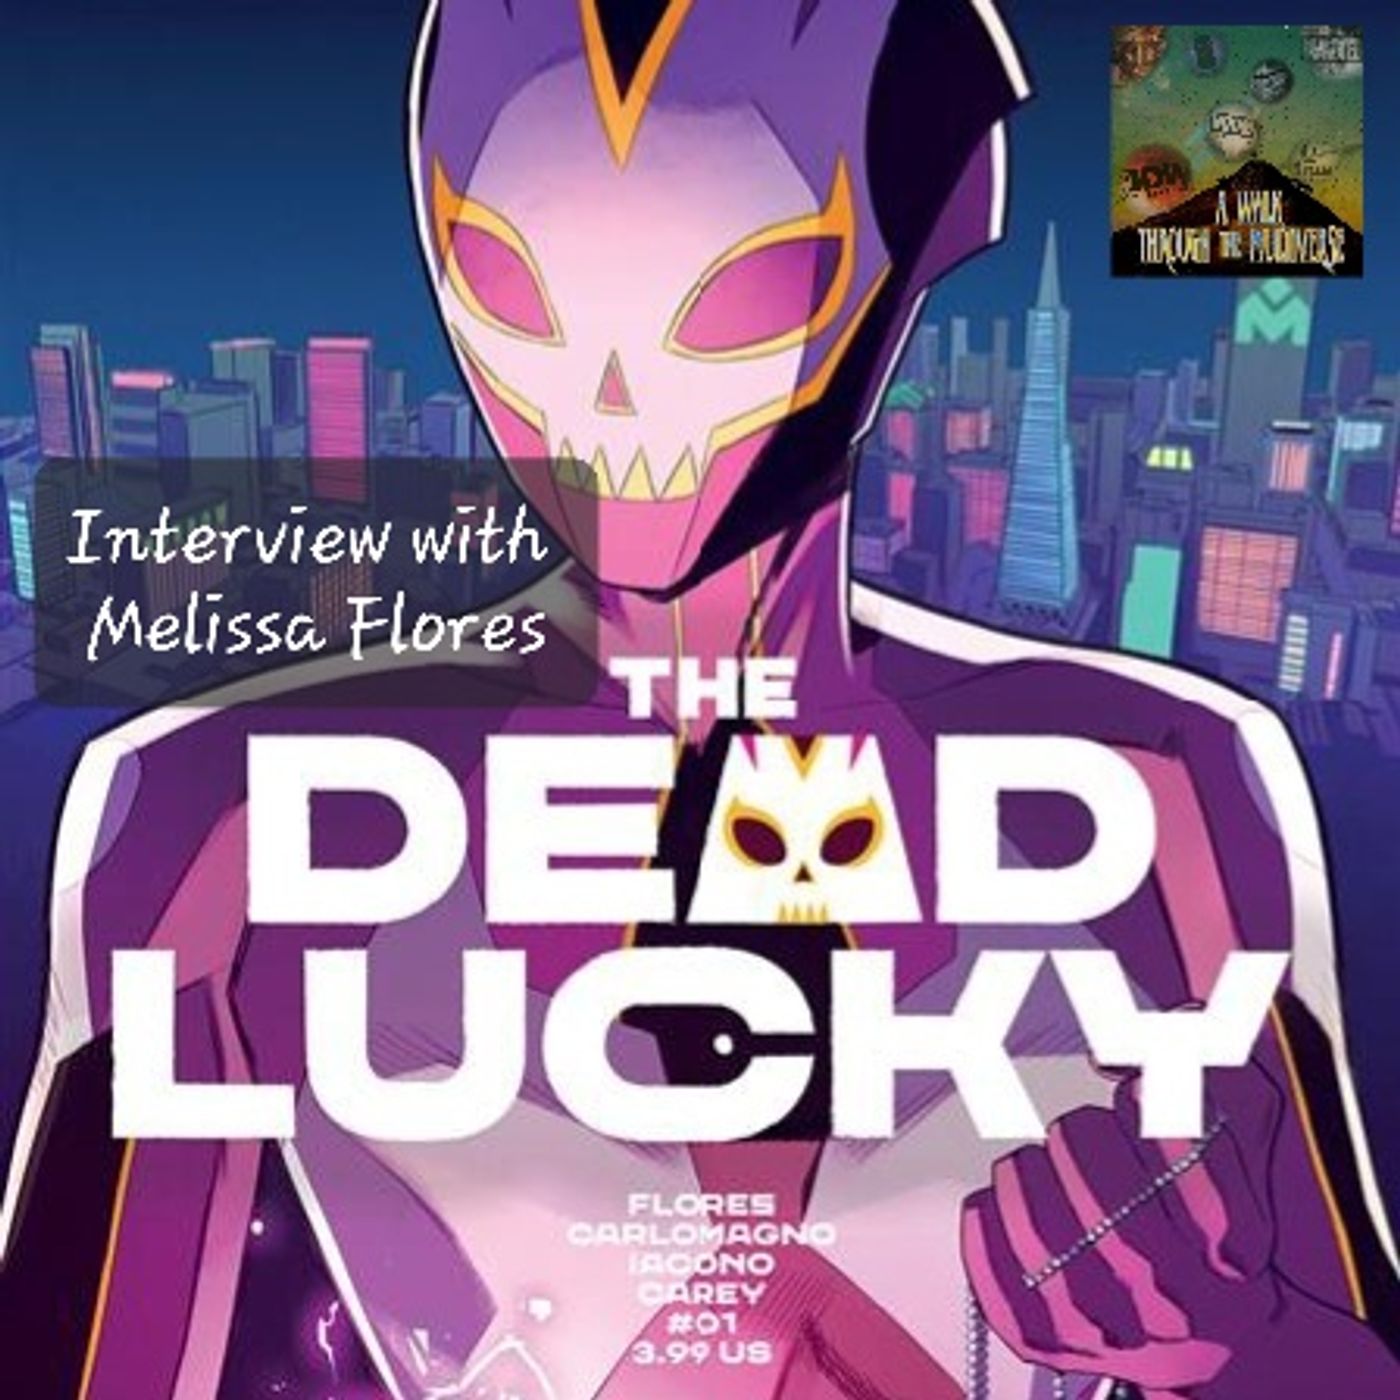 A Walk Through The Multiverse Interview with Melissa Flores